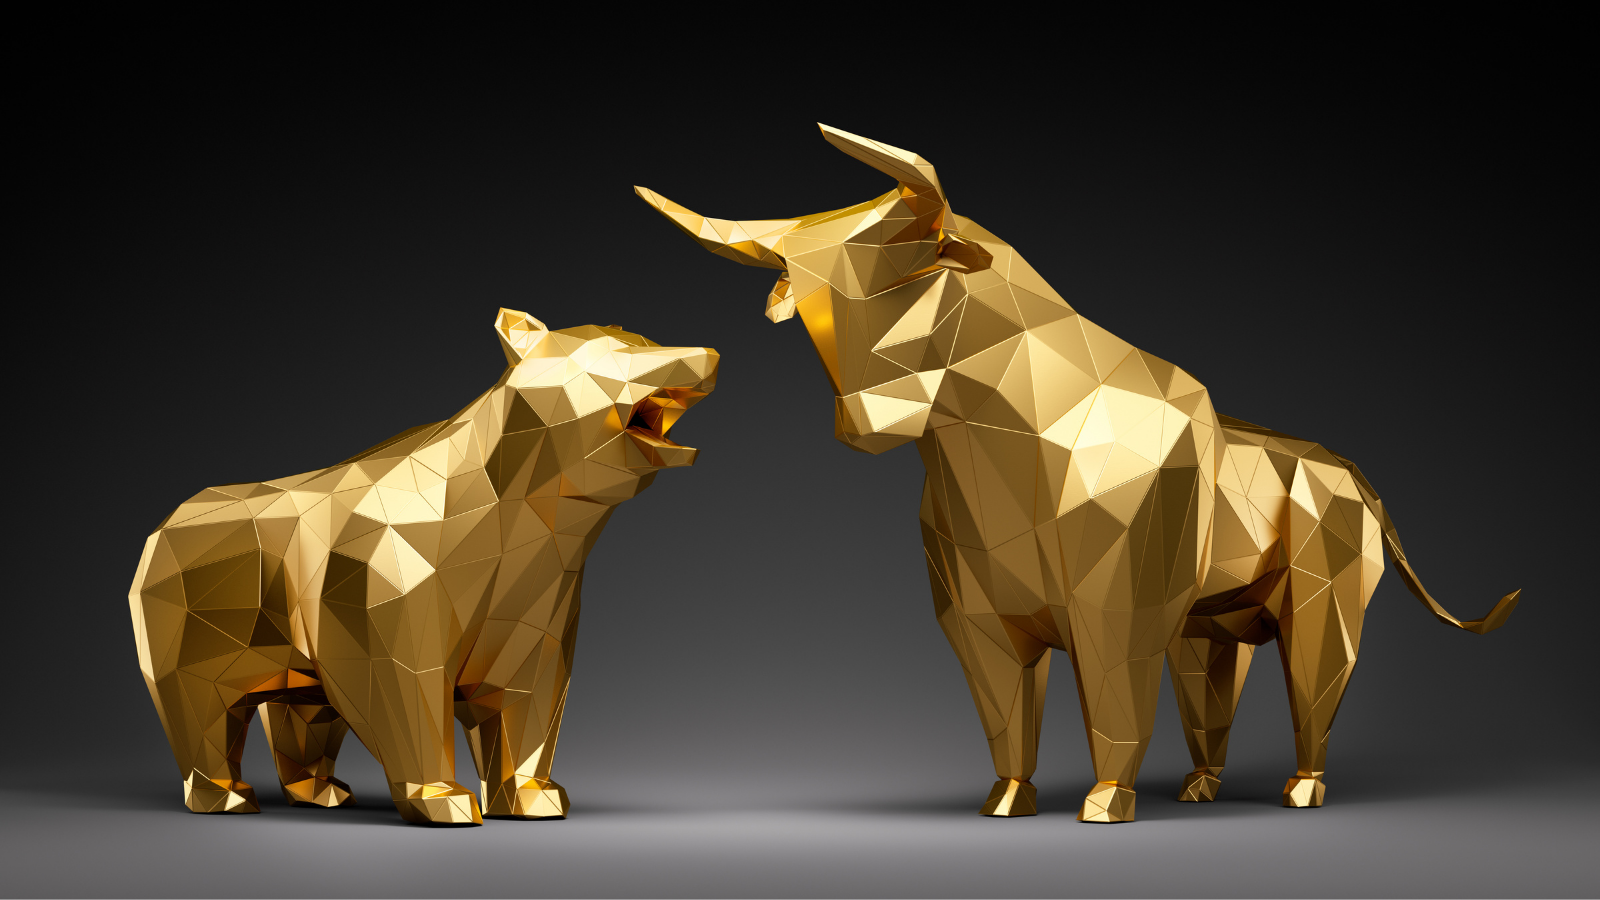 Hut 8 CEO weighs in on the bull and bear markets from a mining perspective